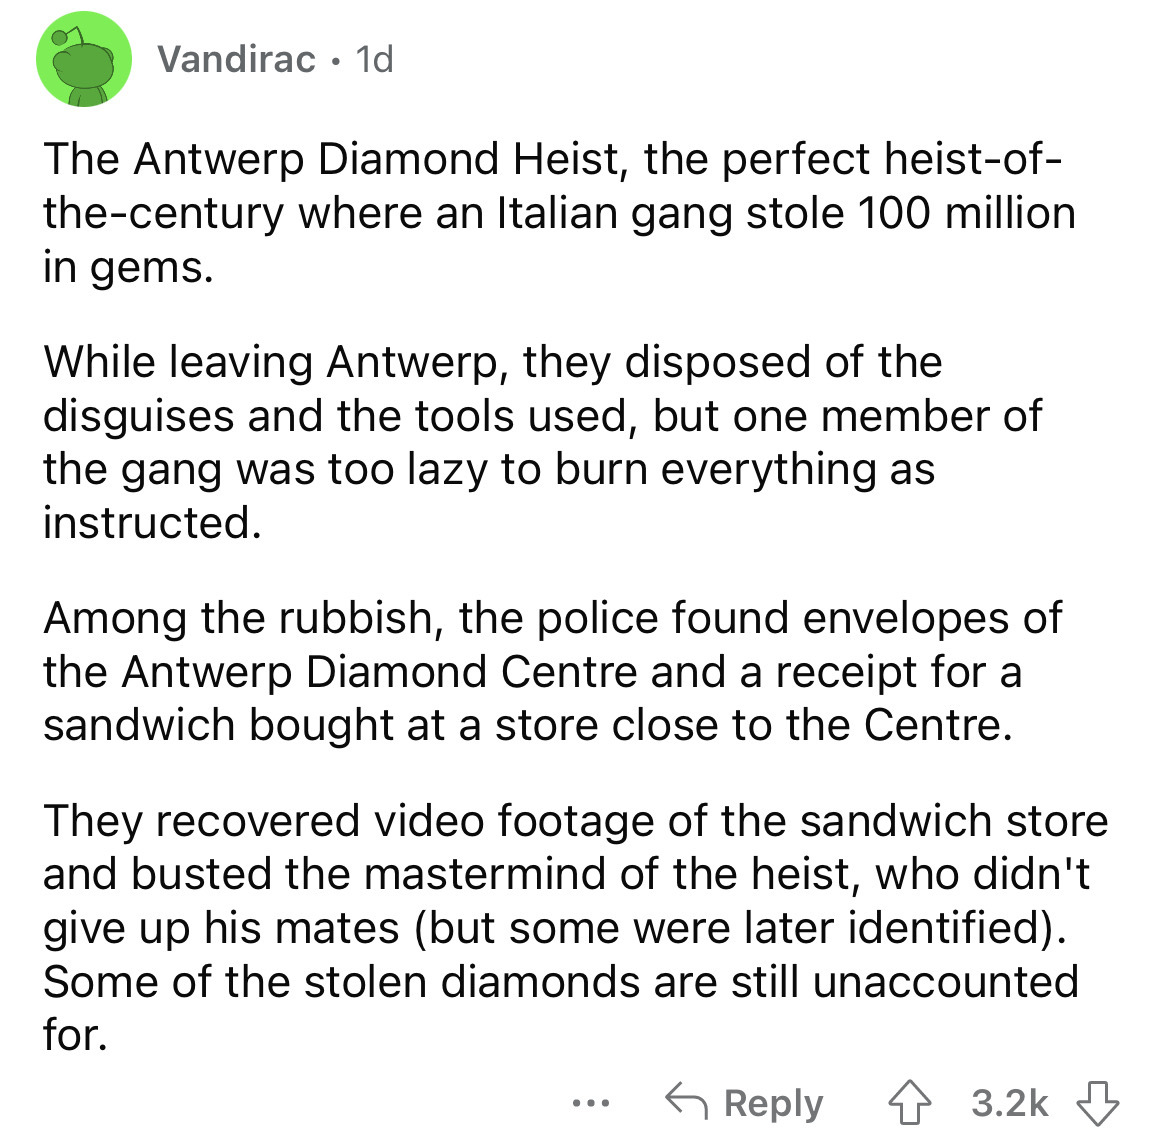 angle - Vandirac 1d The Antwerp Diamond Heist, the perfect heistof thecentury where an Italian gang stole 100 million in gems. While leaving Antwerp, they disposed of the disguises and the tools used, but one member of the gang was too lazy to burn everyt